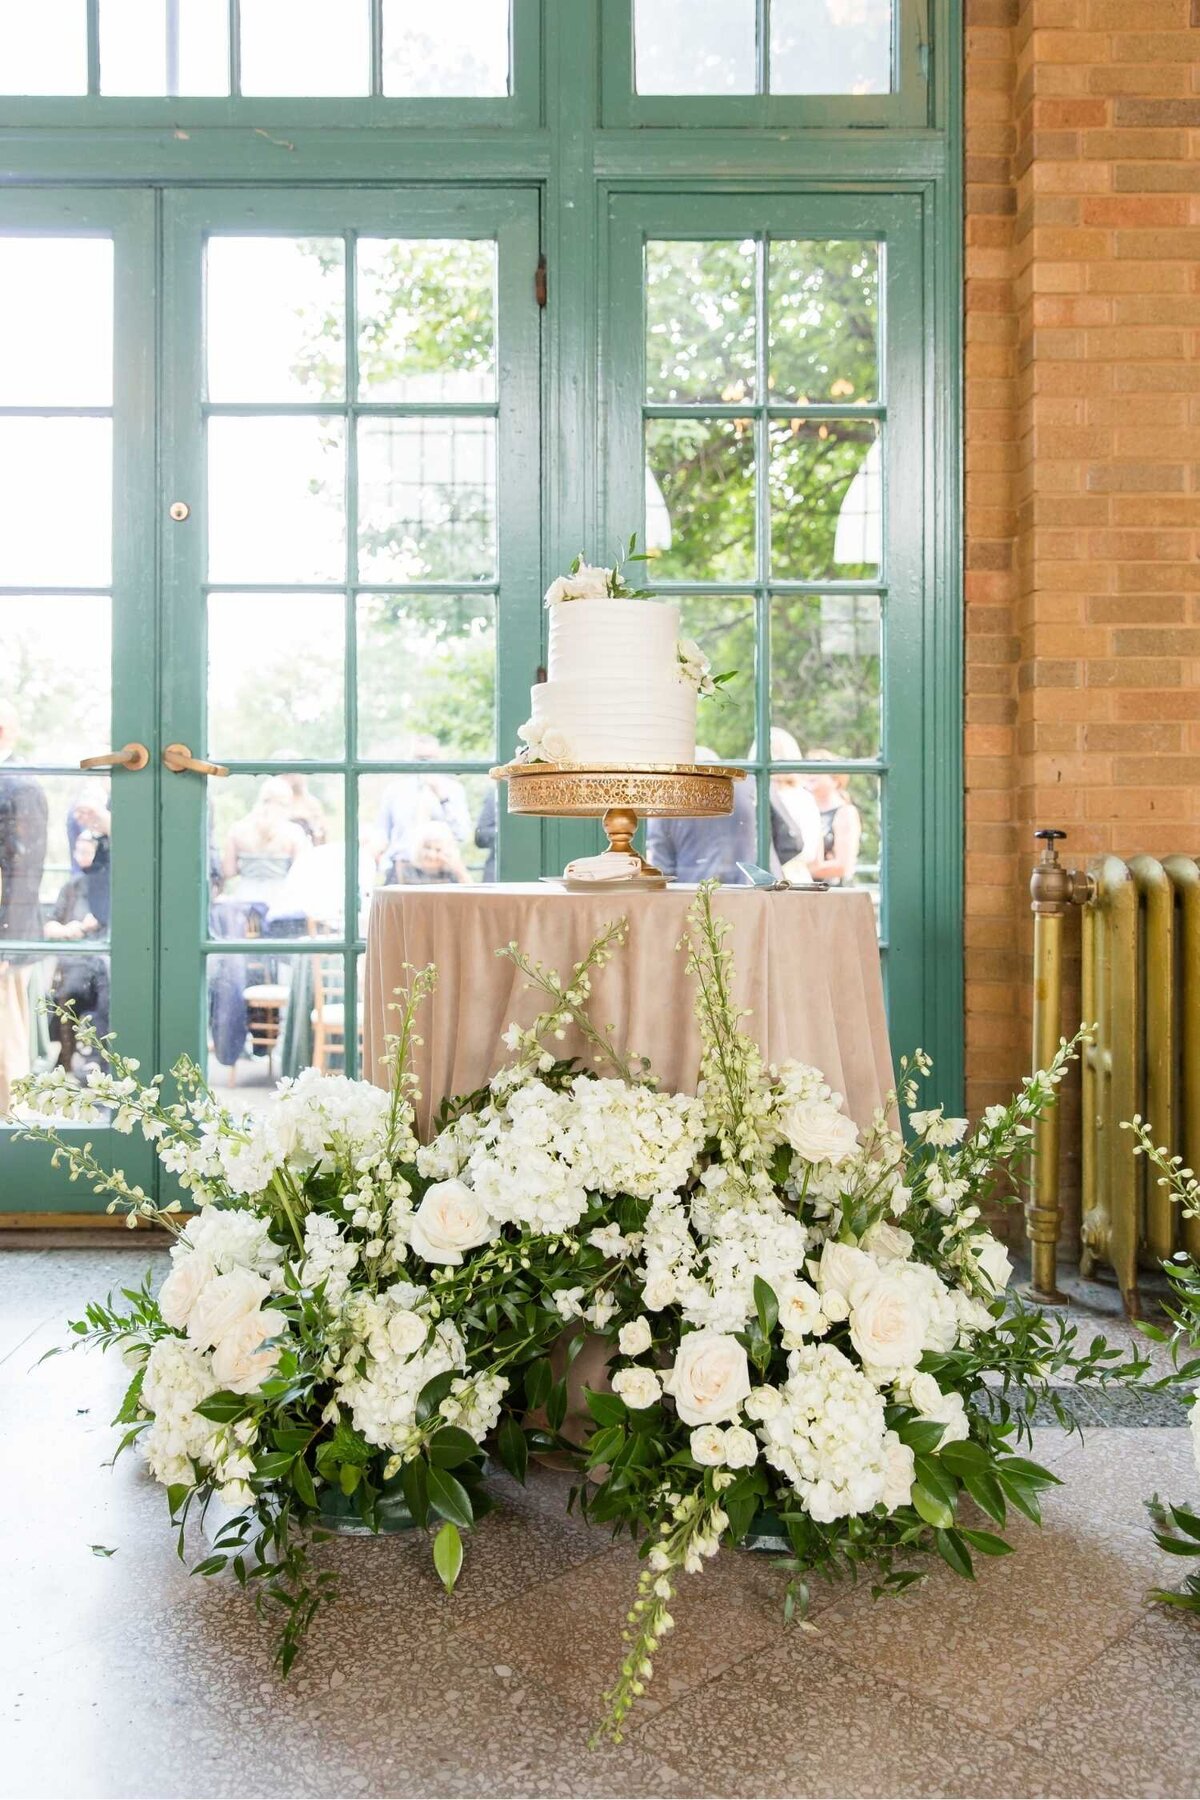 Cake Table Display at Luxury Chicago Historic Wedding Venue